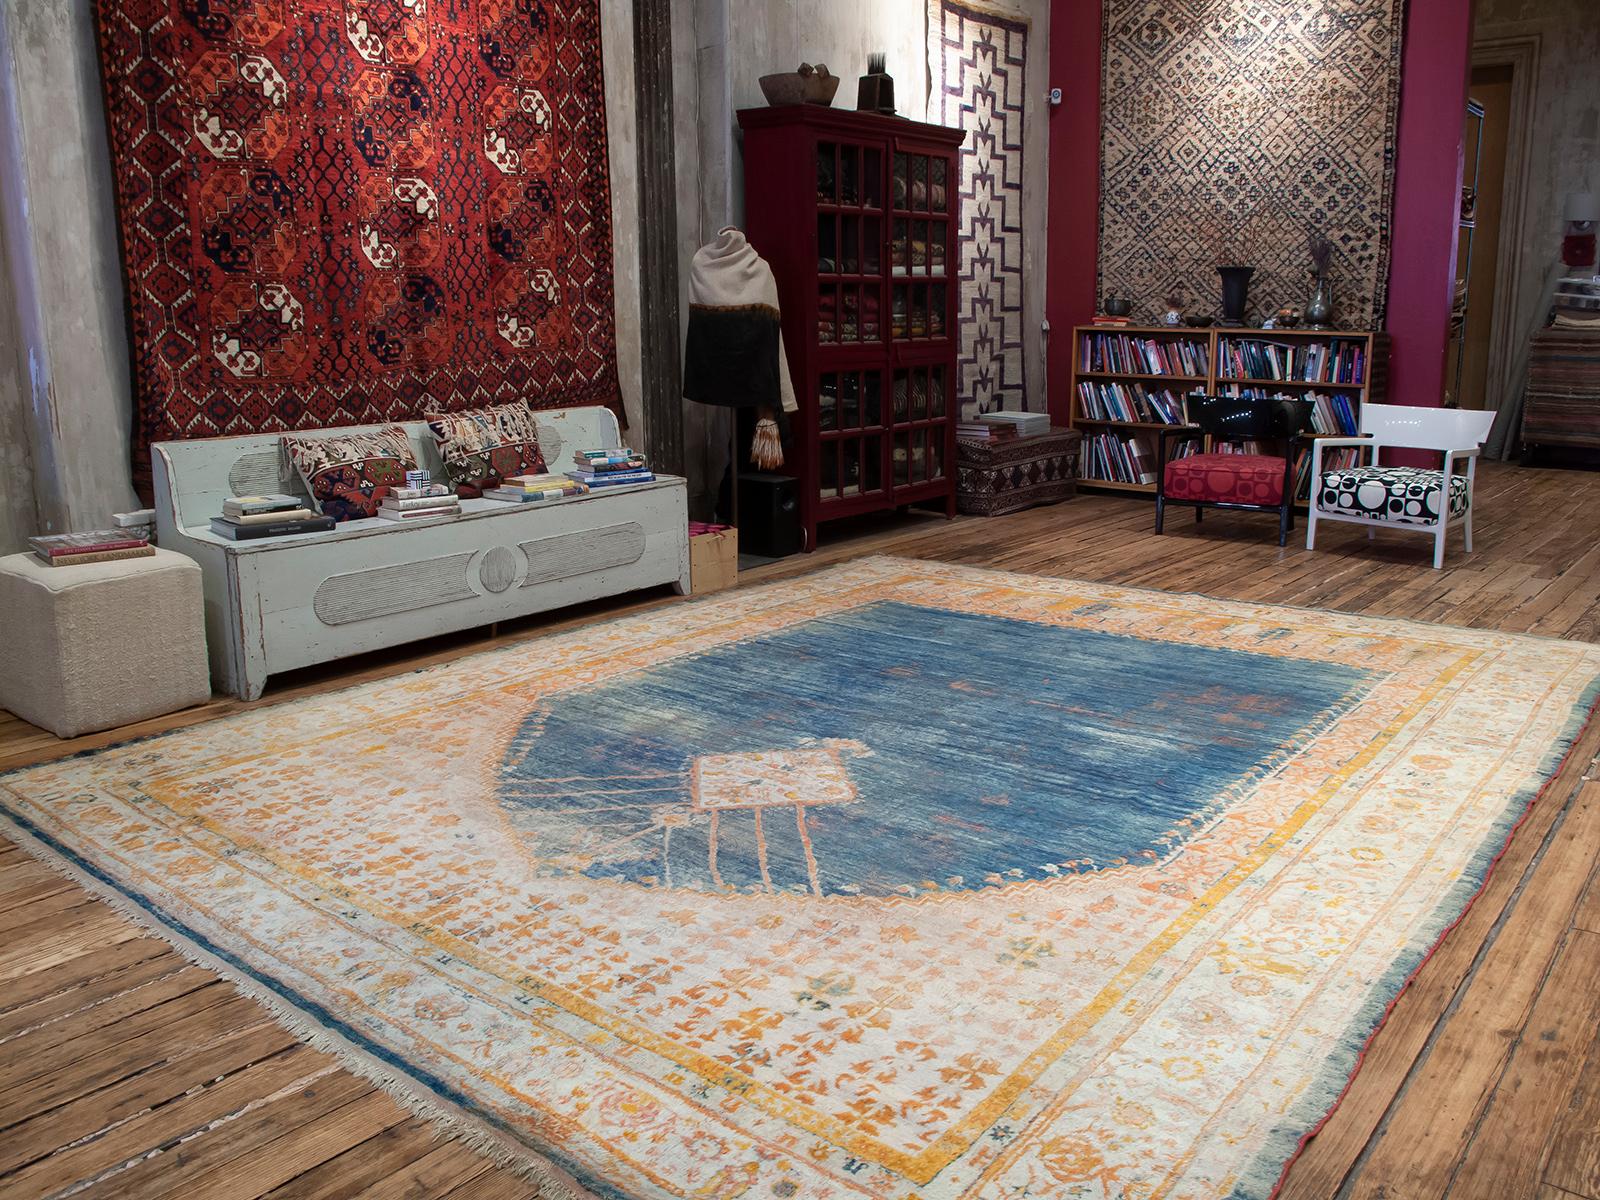 A luxurious example from the prolific looms of the Oushak region in Western Turkey, with brilliant colors, woven in shiny angora (mohair), the hair of the local angora goats. The design is inspired by prayer rugs, enlarged to represent a heavenly